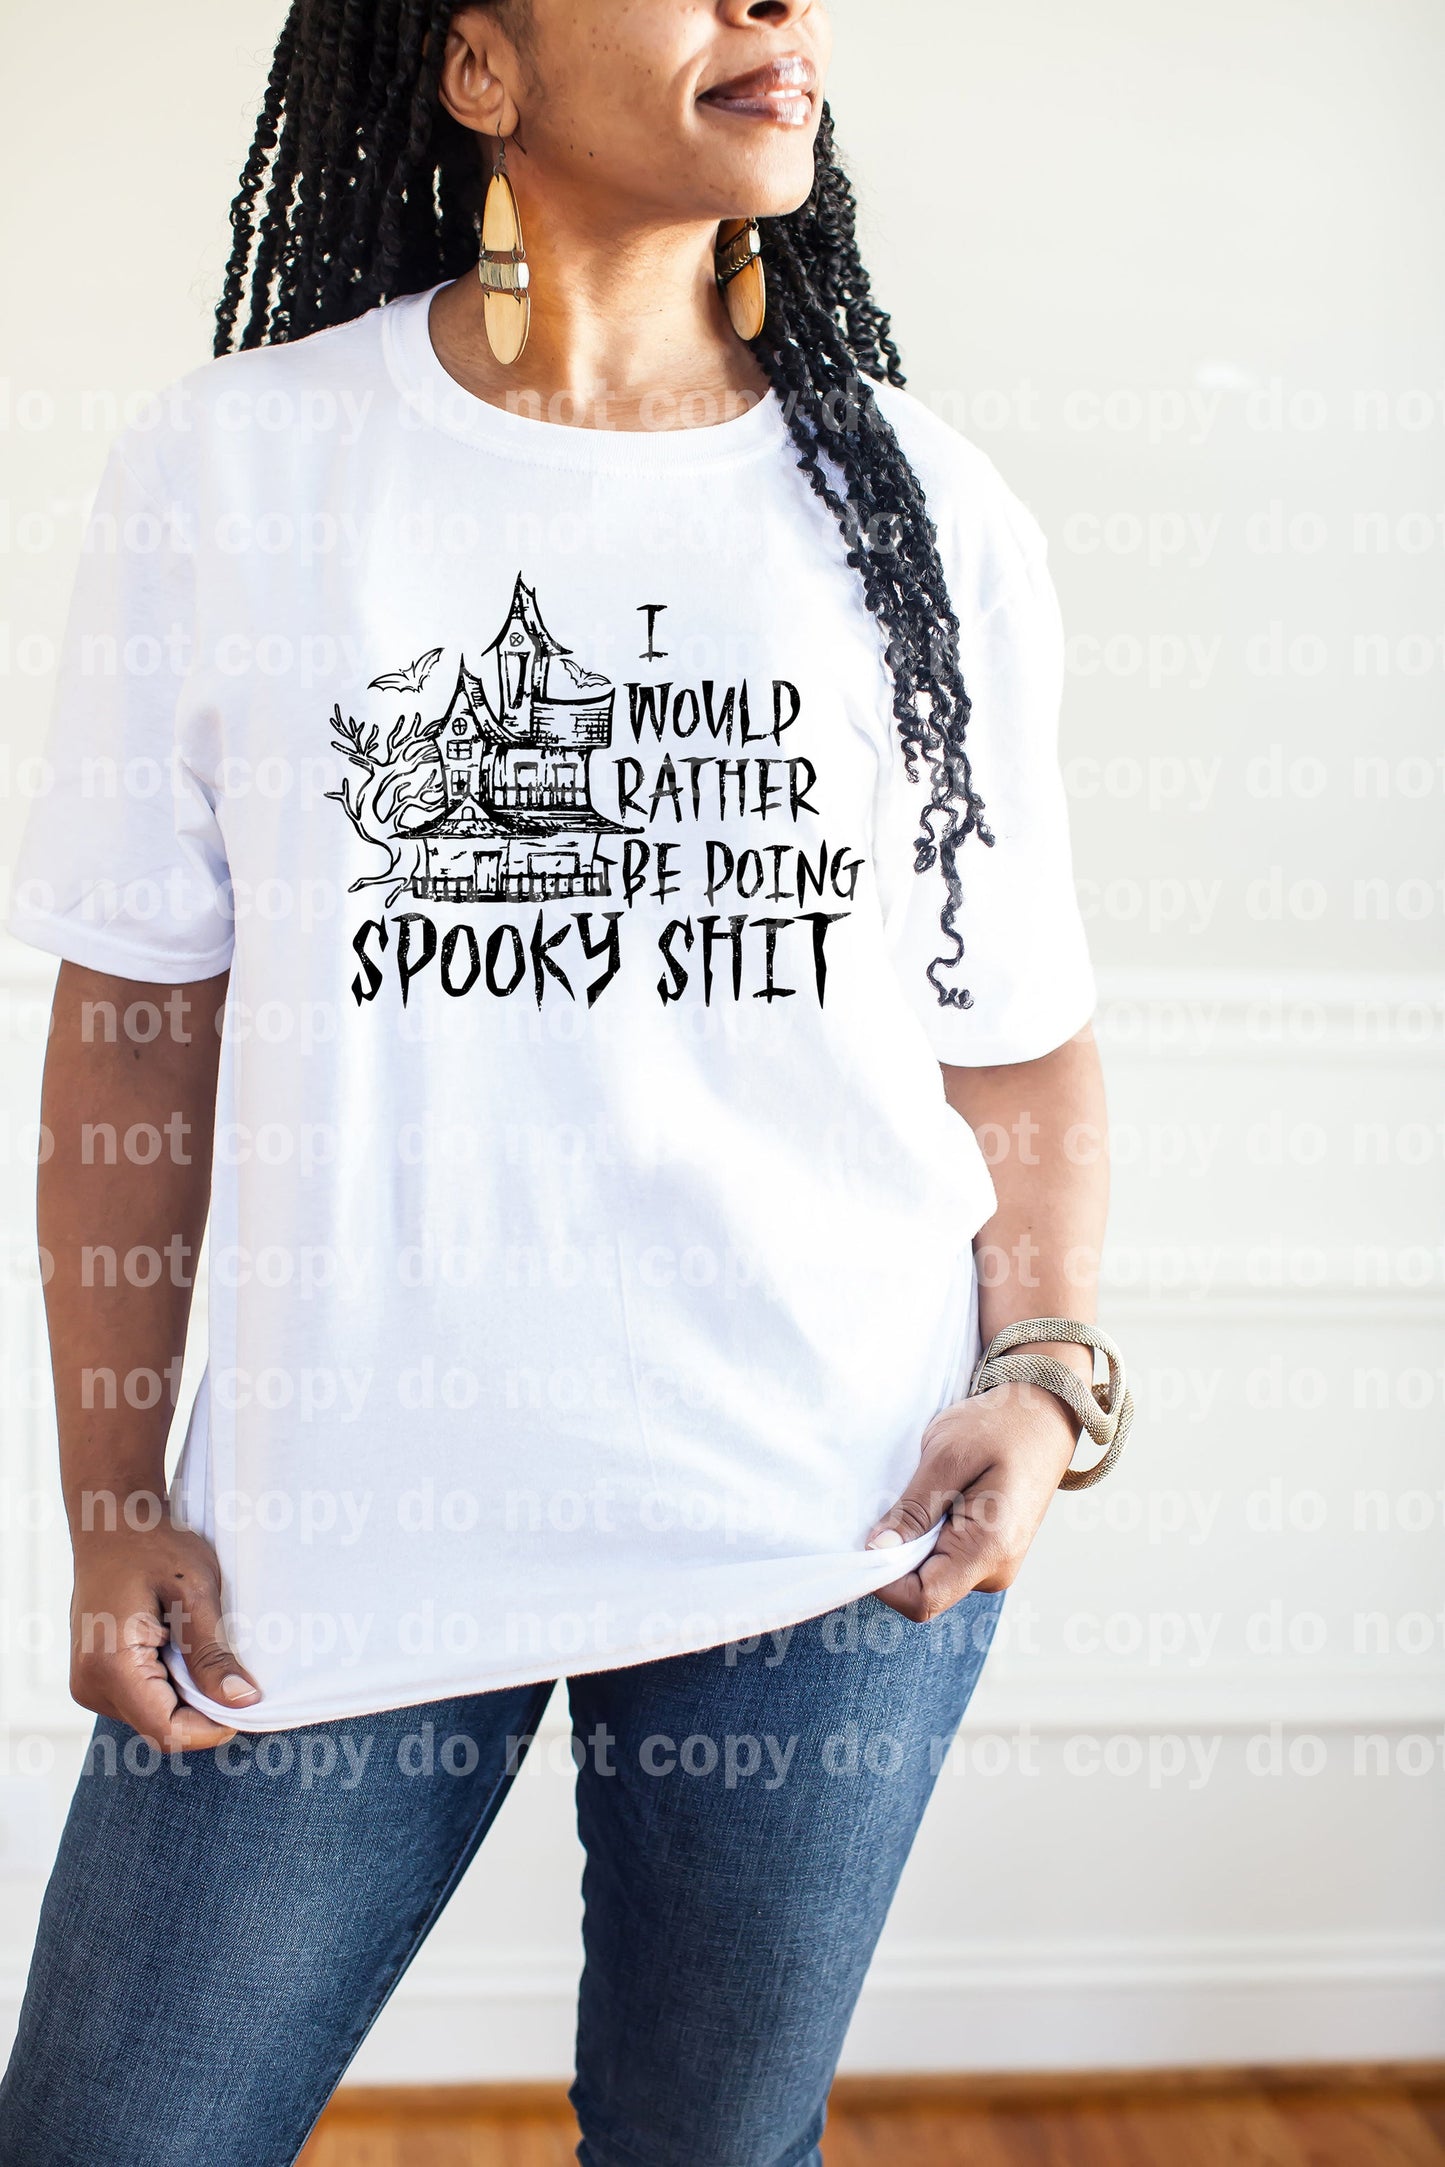 I Would Rather Be Doing Spooky Shit Distressed Full Color/One Color Dream Print or Sublimation Print